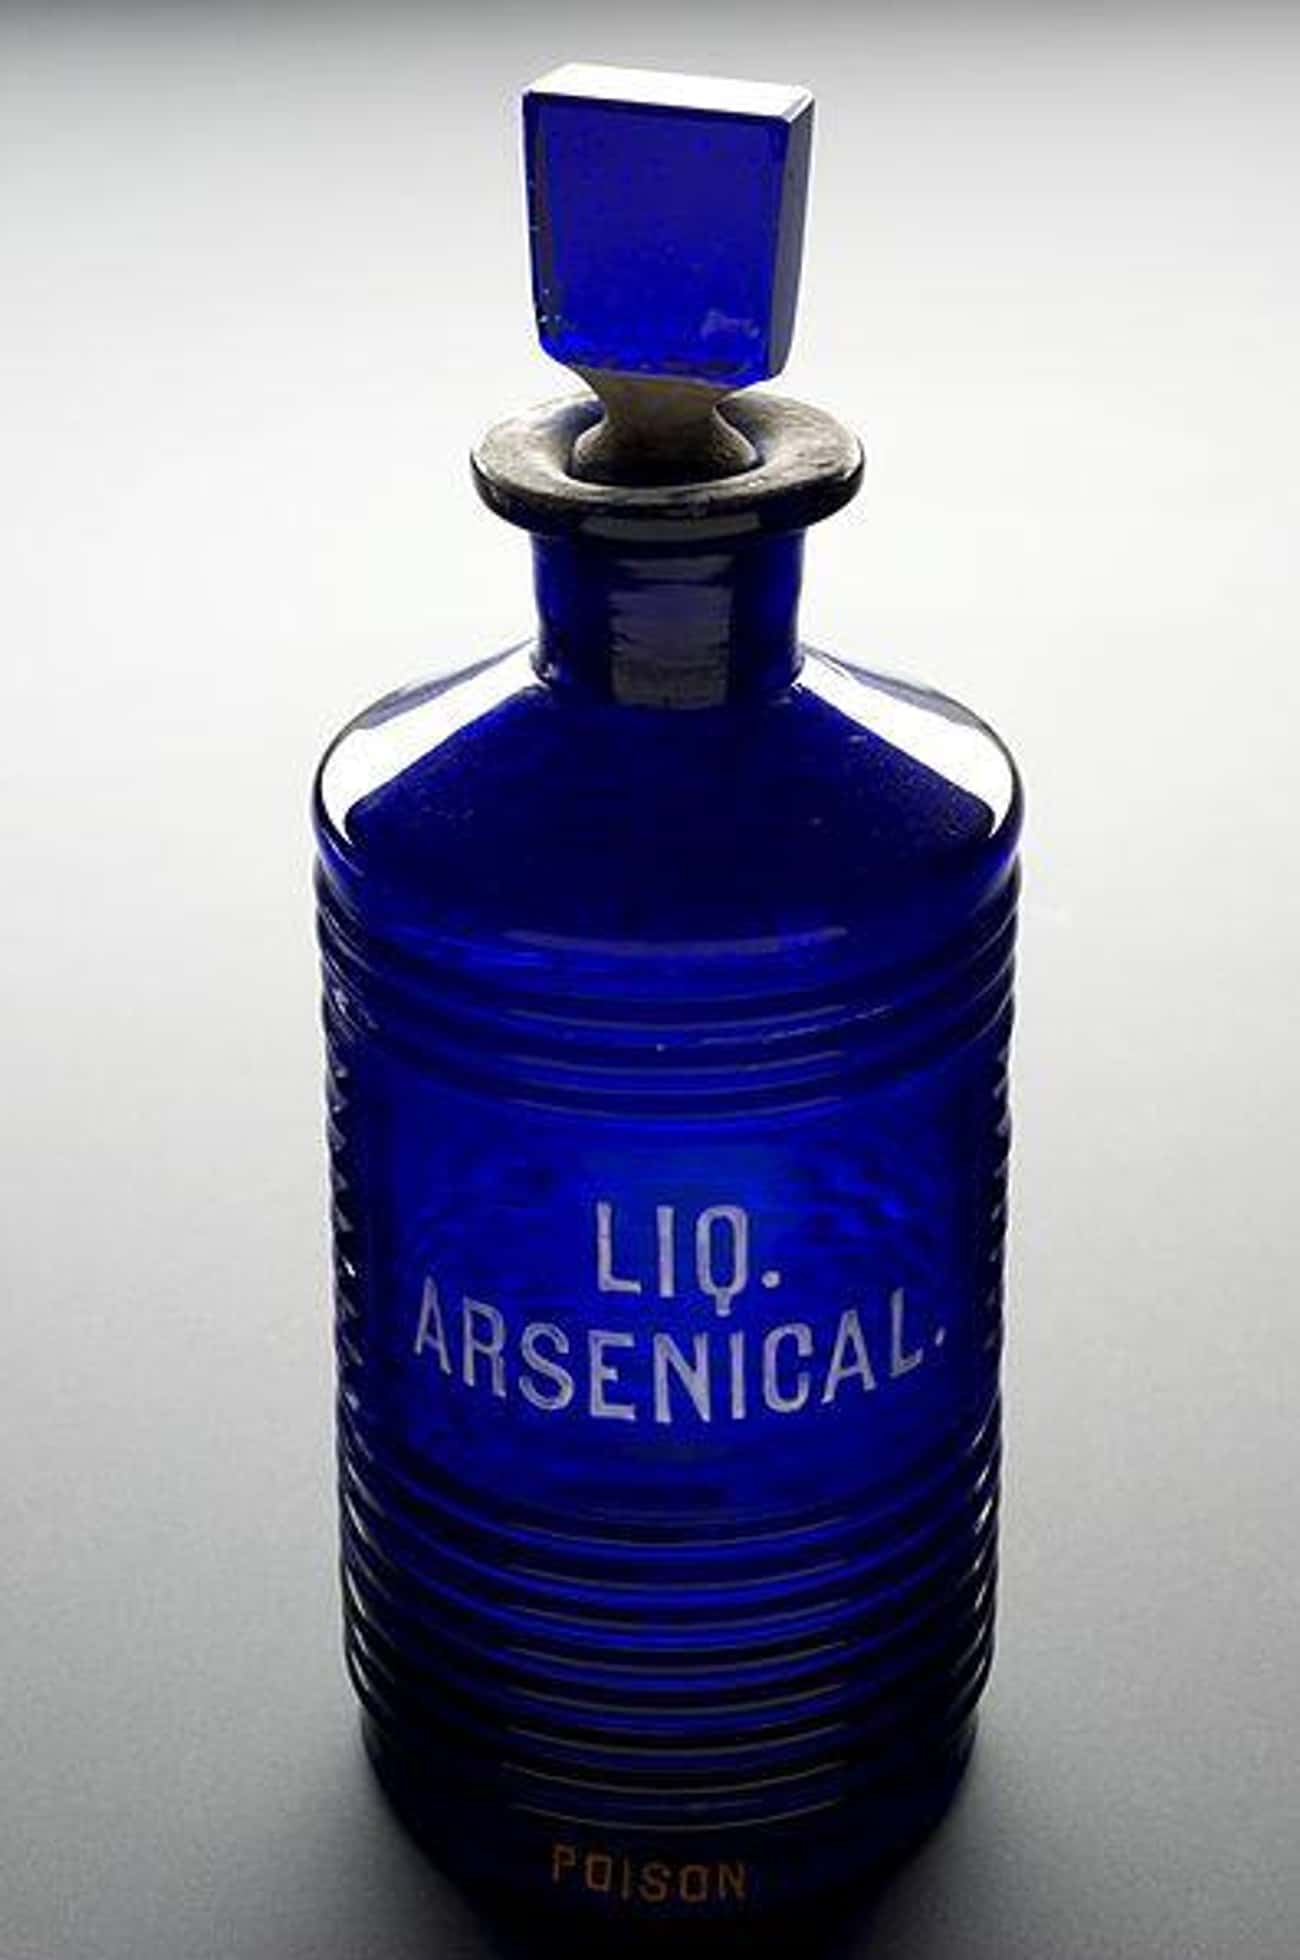 One Renaissance Poisoner Invented Arsenic-Laced Makeup For Women To Murder Their Husbands